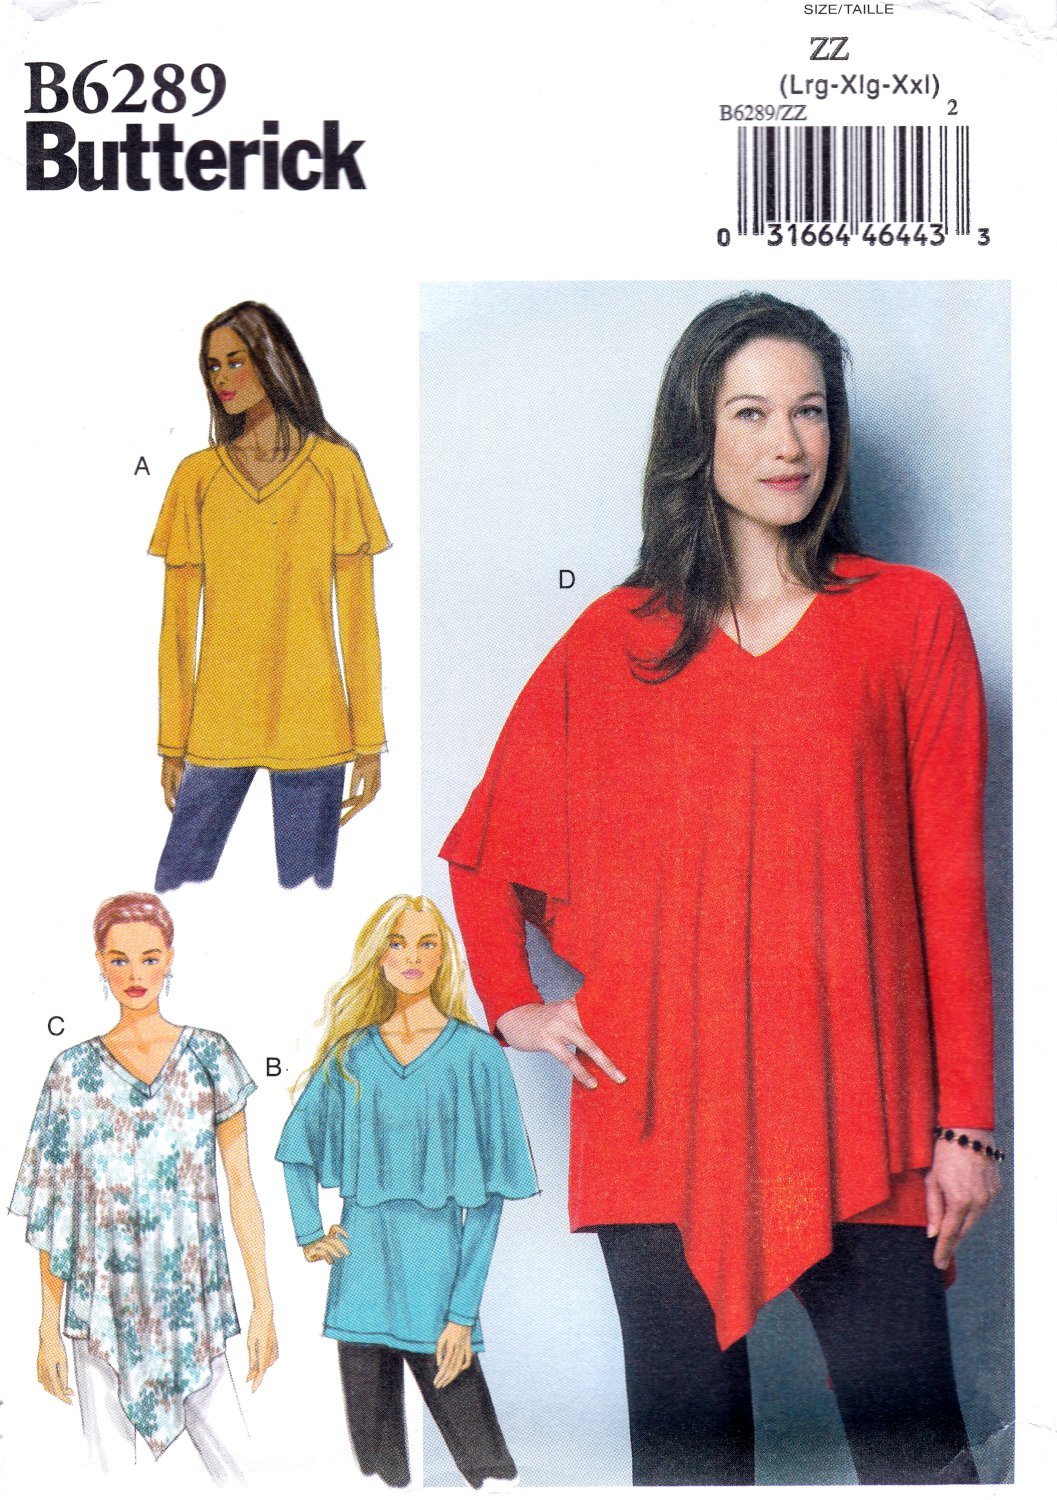 Butterick B6289 Misses Tunics Loose Fitting Pullover Sewing Pattern Sizes Lrg-Xlg-Xxl